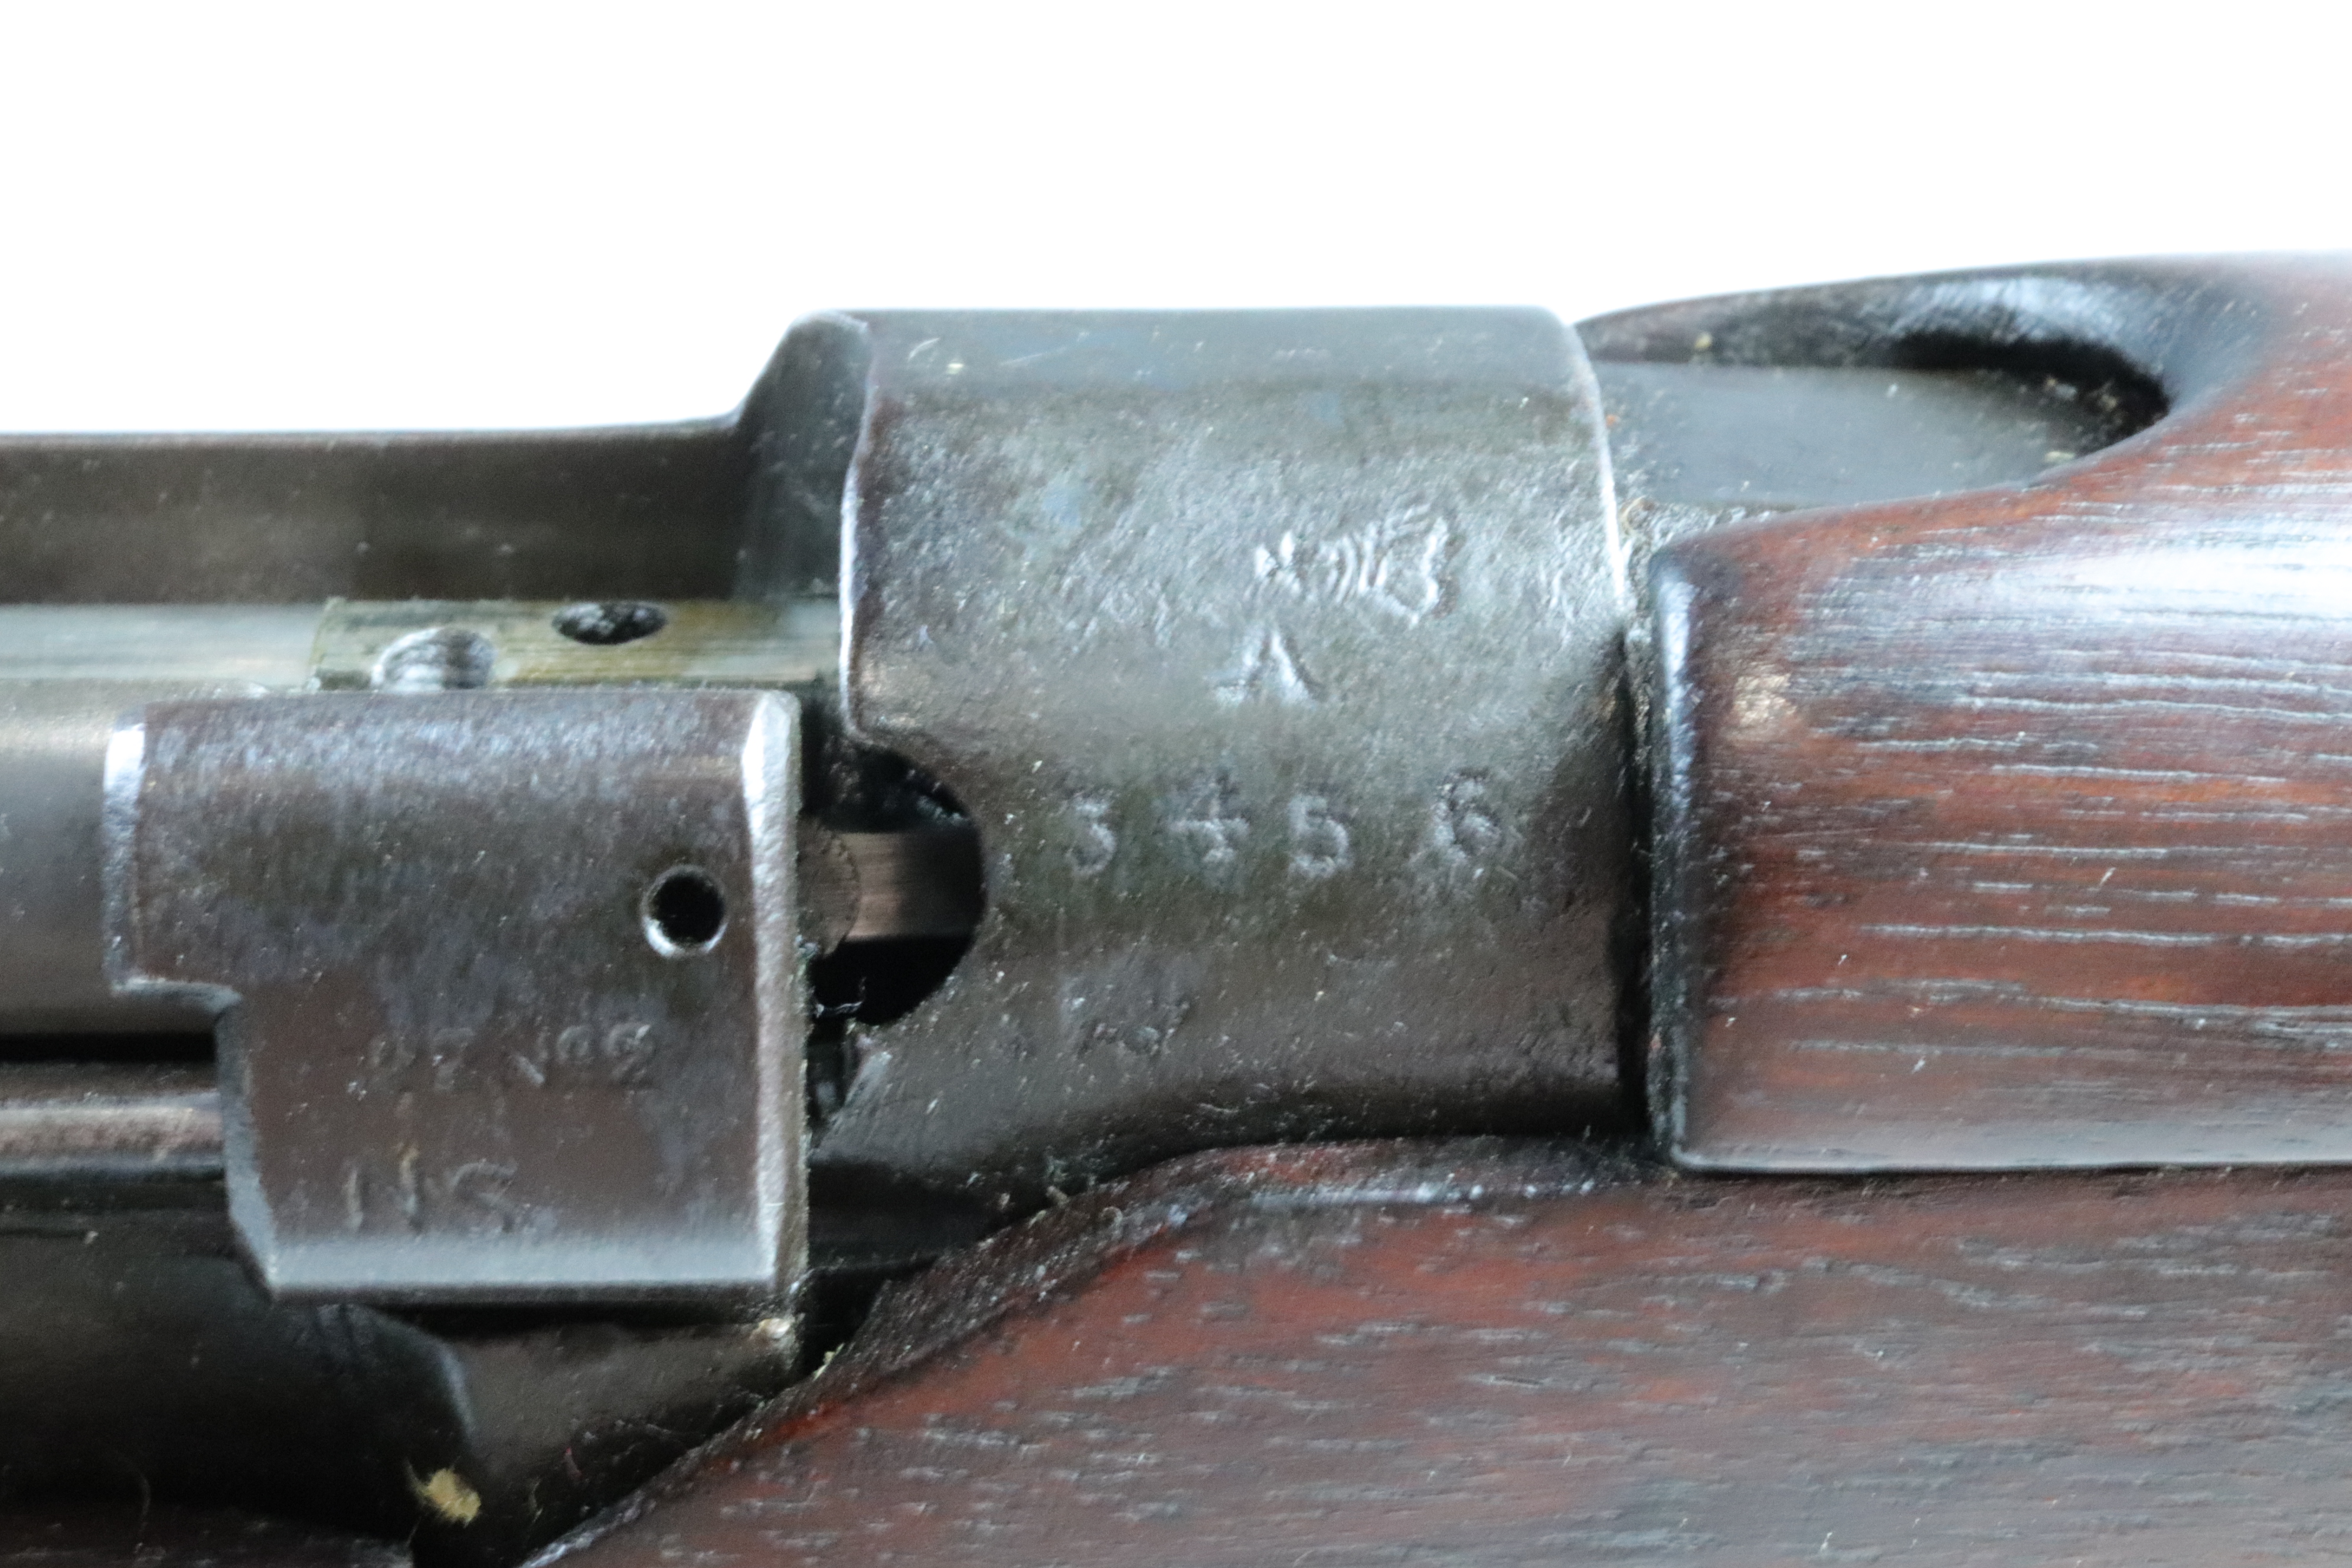 A Short Lee Enfield .22 bolt action rifle, stamped "G.R. ENFIELD 1916", rifle and bolt with matching - Image 11 of 11